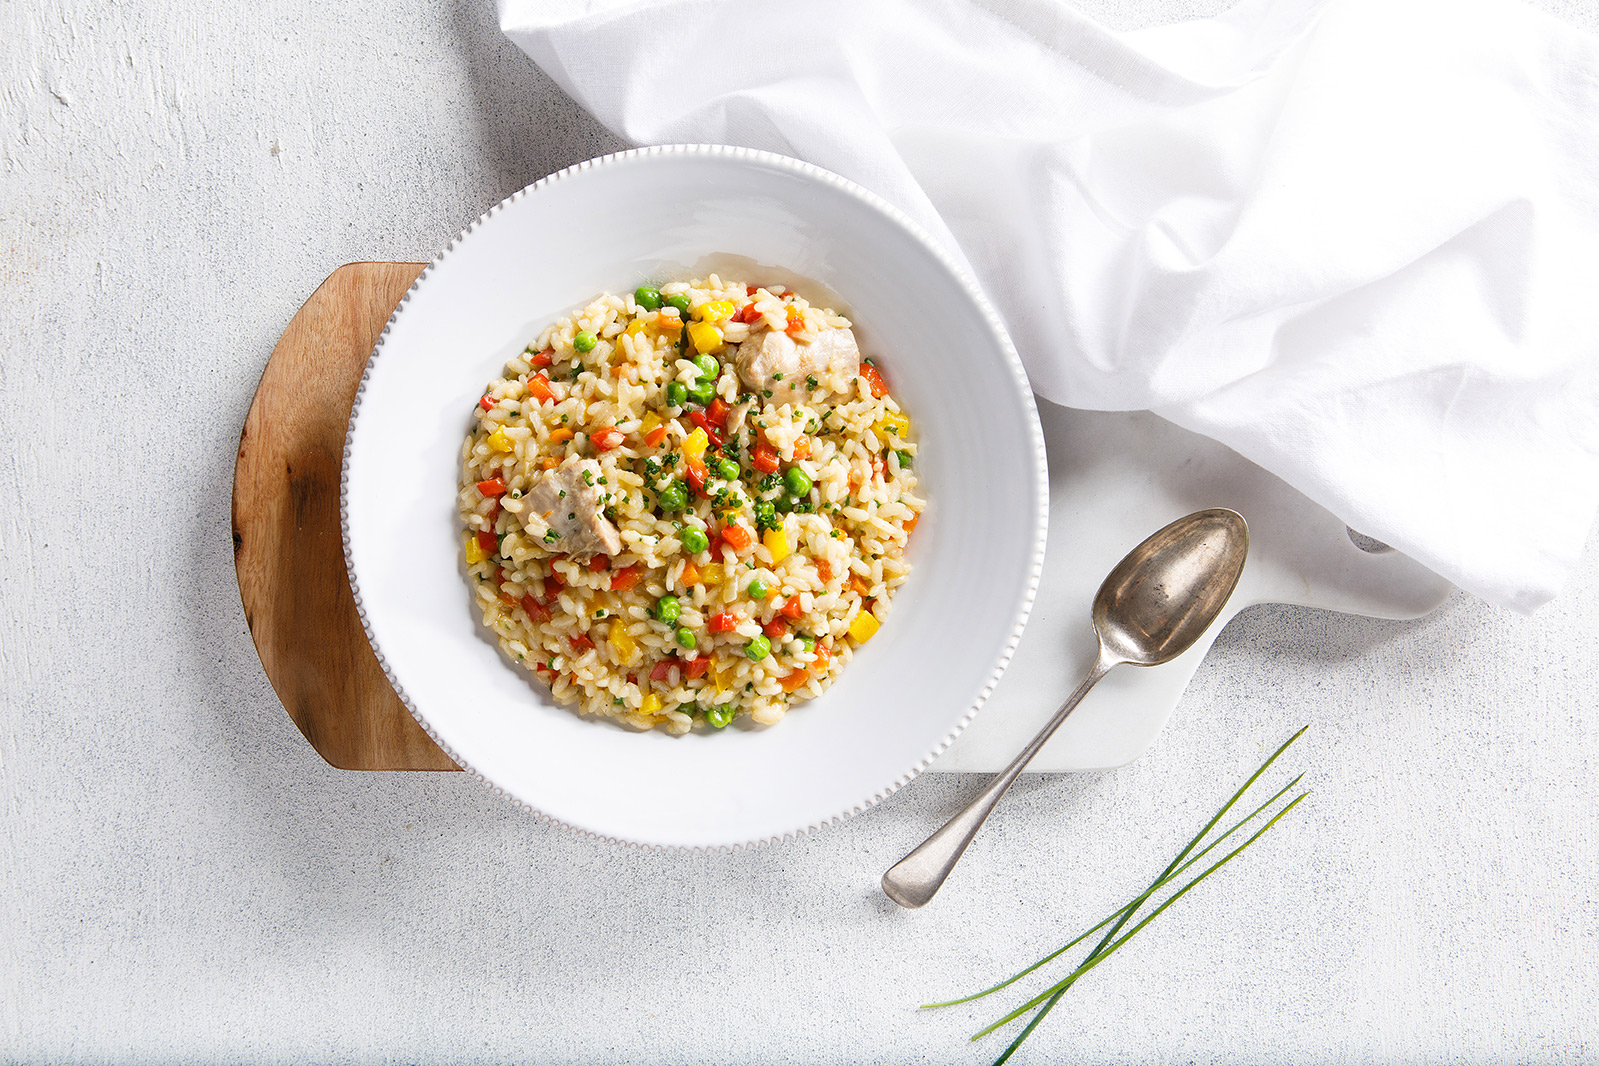 Image of rainbow risotto served in a large white bowl on a wooden cutting board with a napkin, chives and a spoon on the side for serving